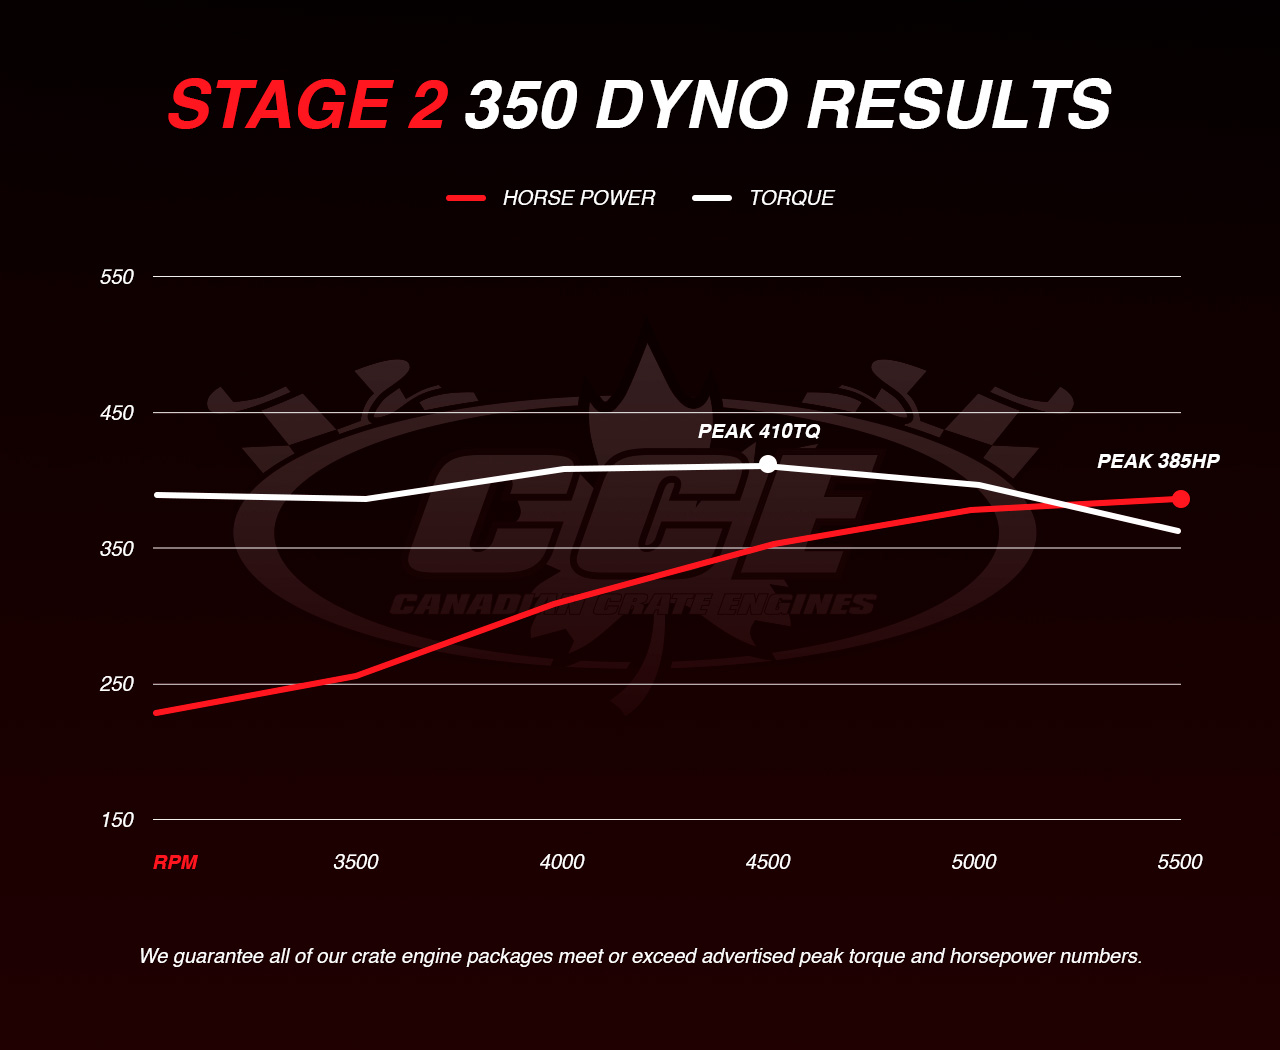 Dyno Graph Results for Chevy Stage 2 showing peak torque of 410TQ and peak horsepower of 385HP